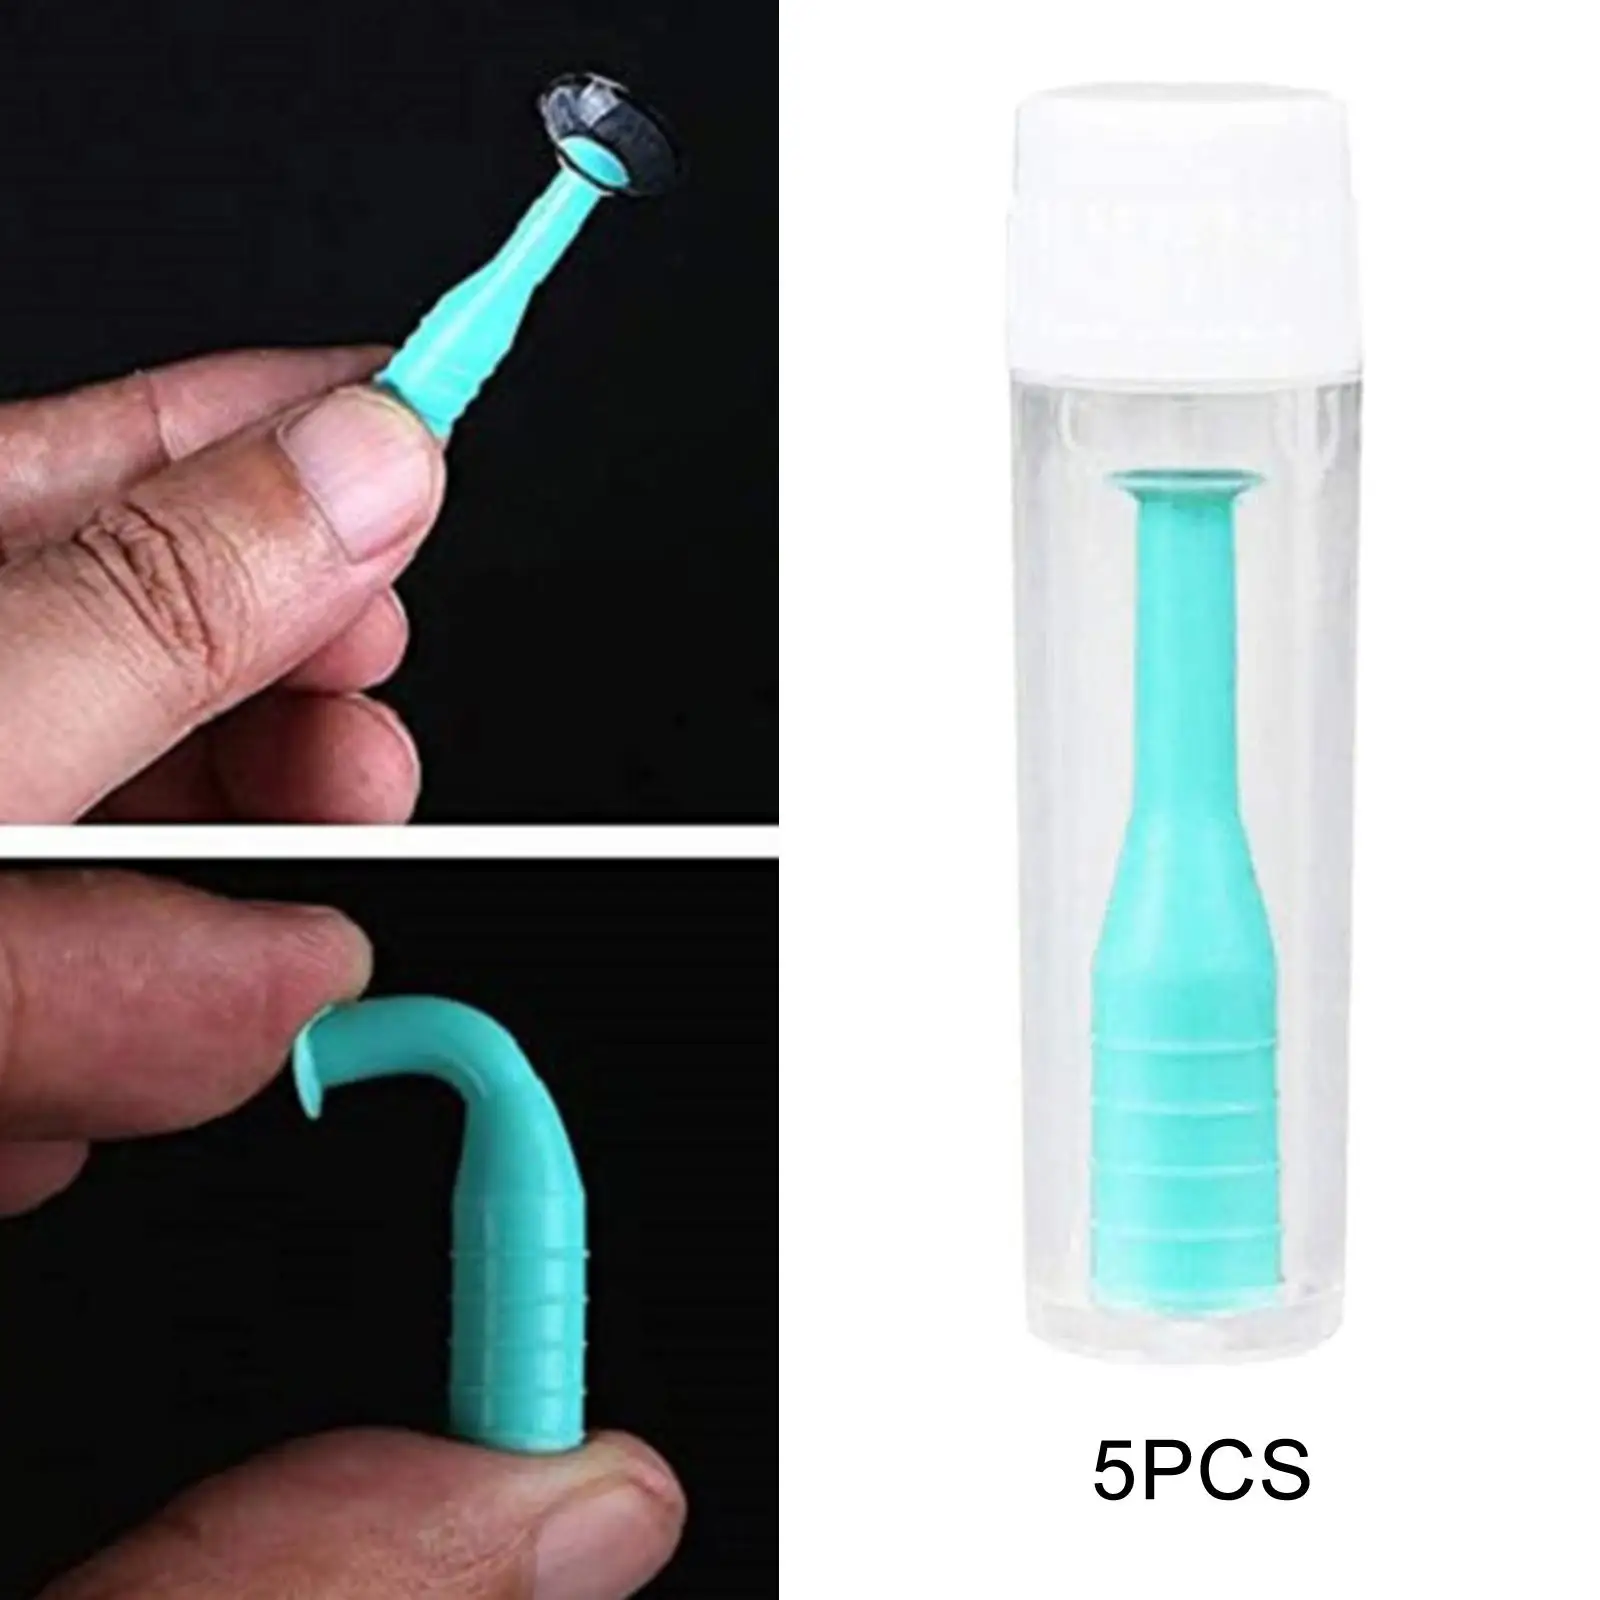 Hard   Remover Insertion Tool Extractor Applicator Device RGP